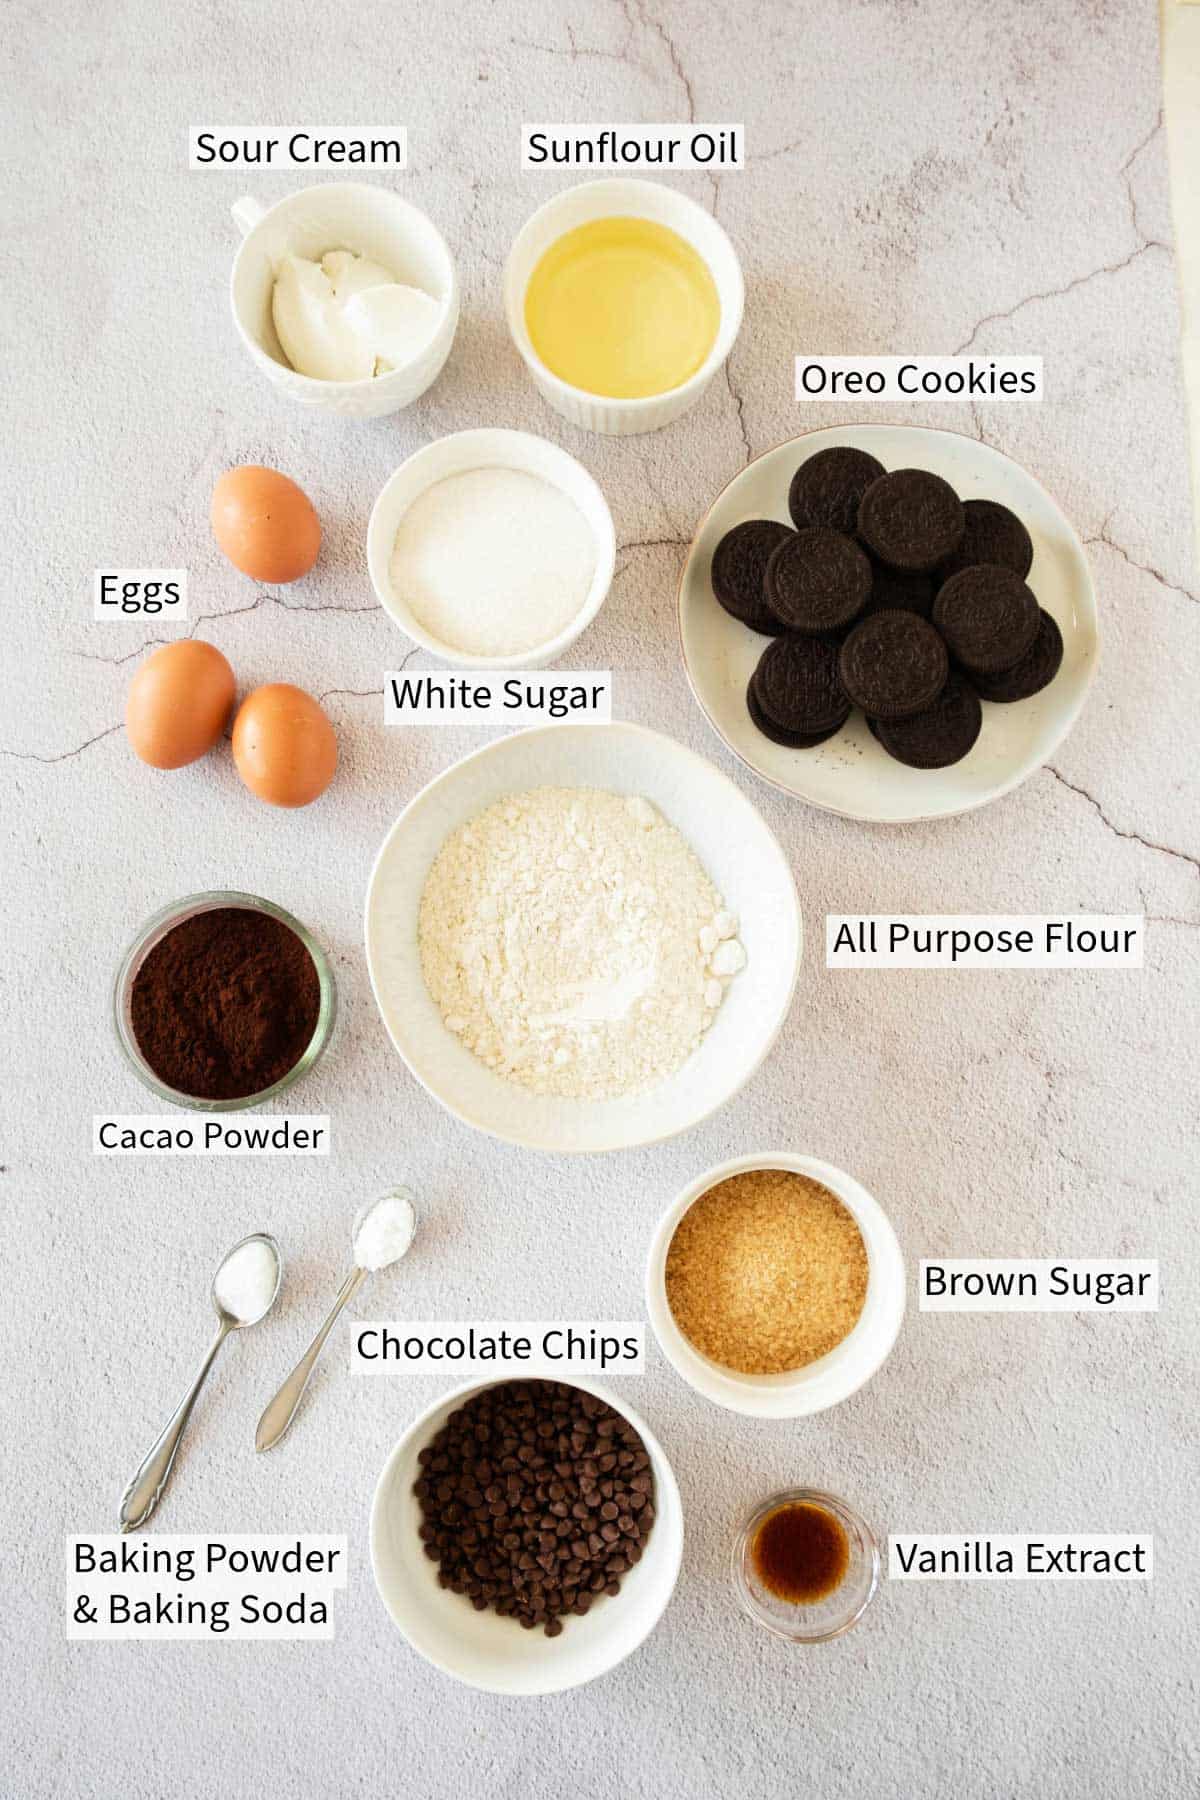 Various baking ingredients neatly arranged and labeled on a kitchen surface.